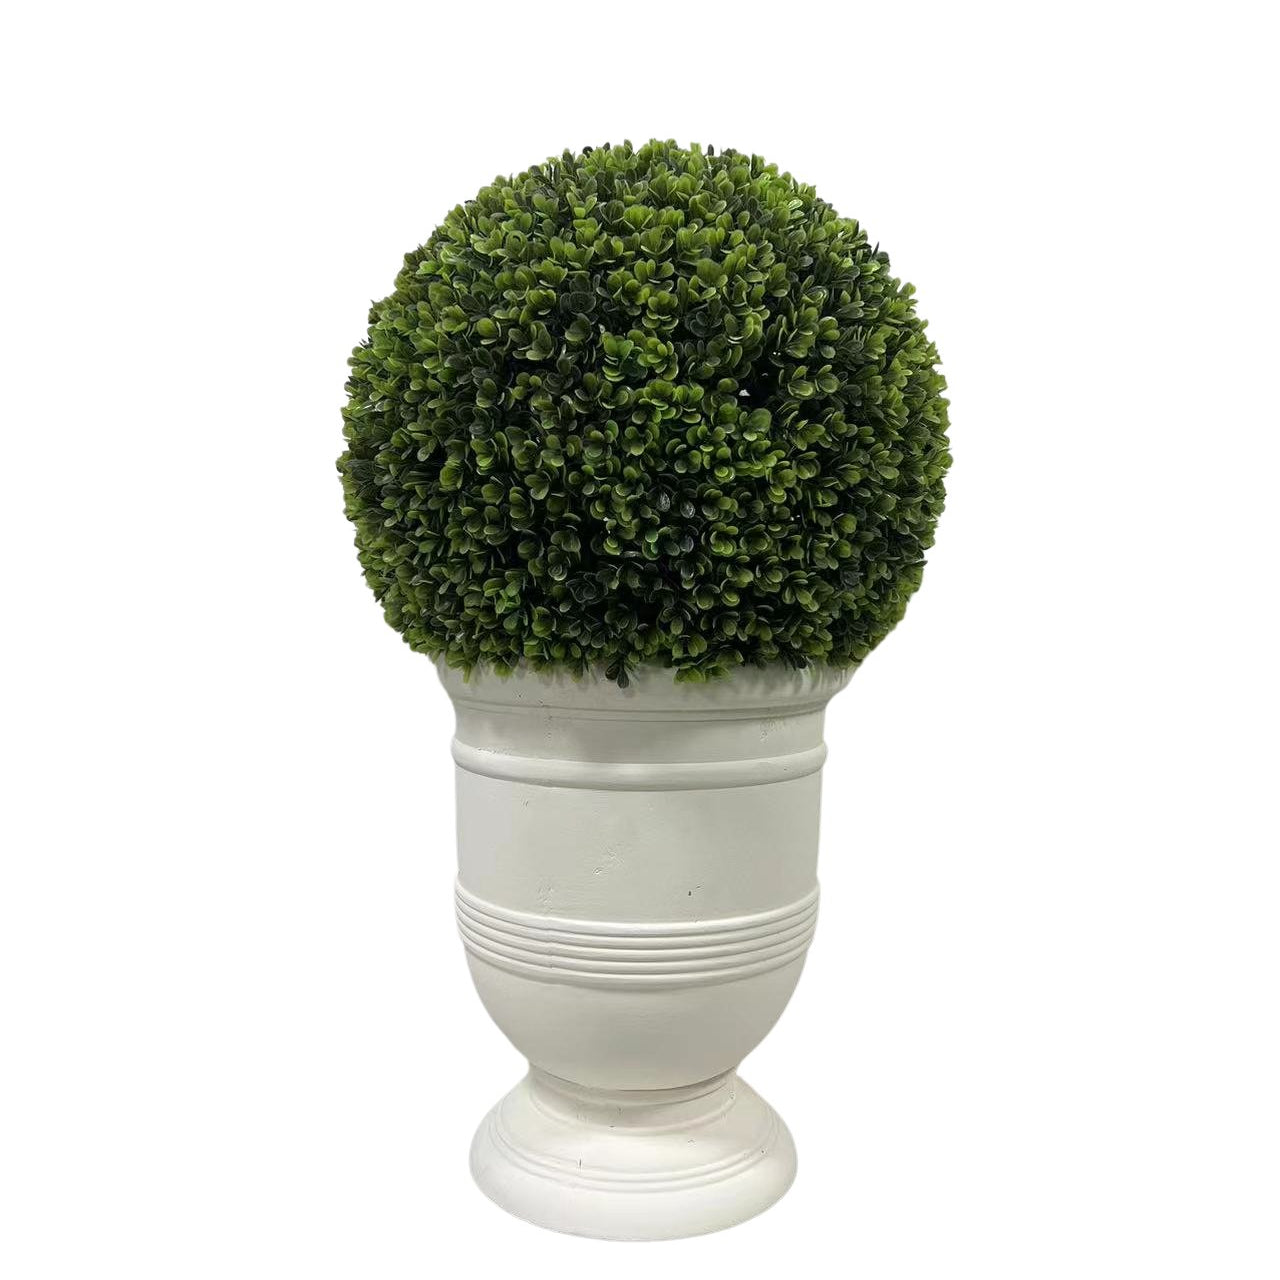 24" Ball Topiary Faux Plant in Pot - Outdoor Decor